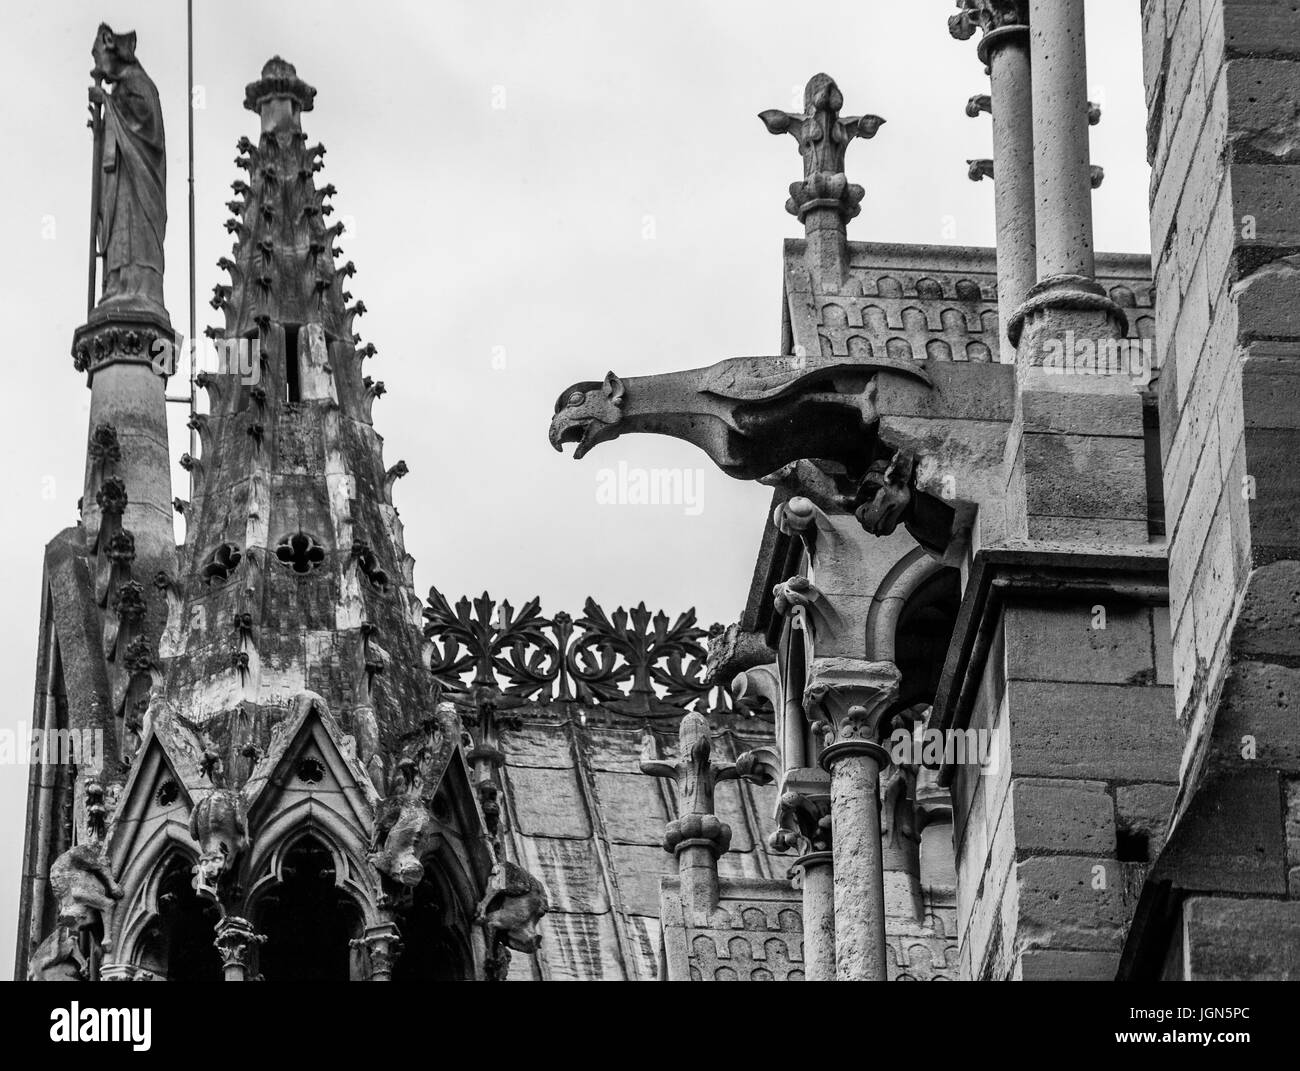 PARIS, FRANCE – 21 SEPTEMBER 2012: The statues and architectural elements of the main facade of Notre Dame de Paris. 21 September, 2012. Paris, France Stock Photo